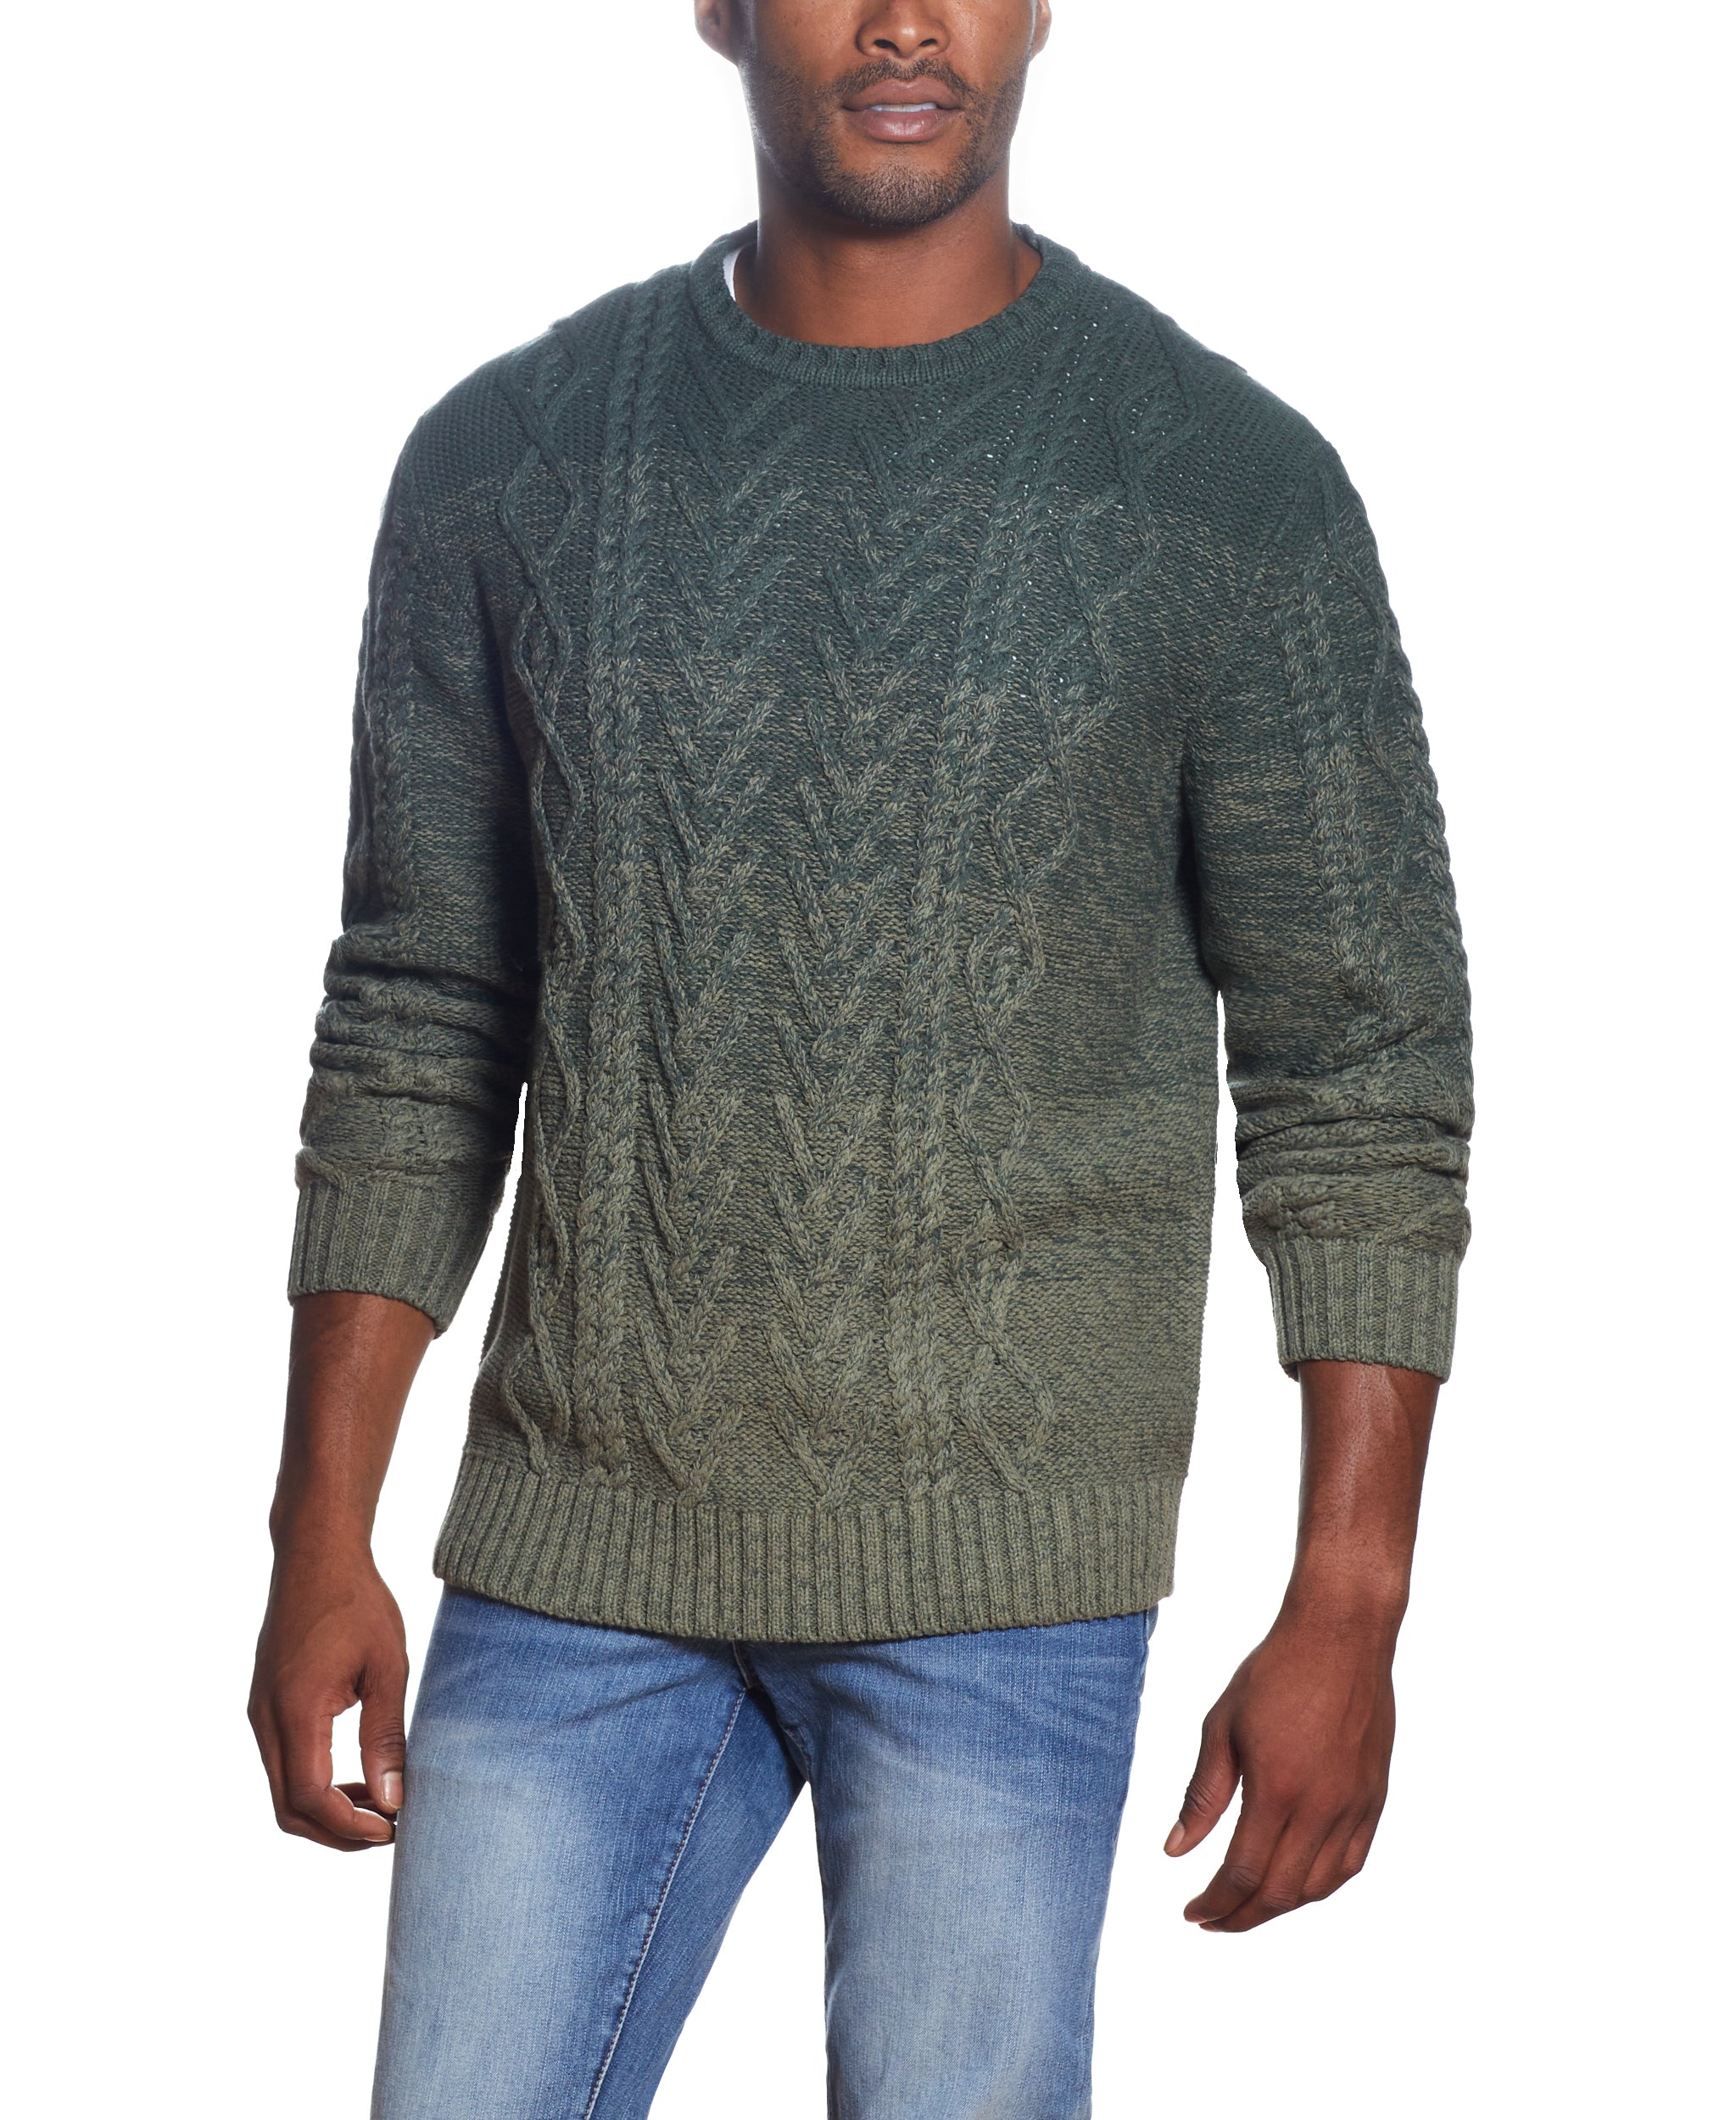 OMBRE CABLE CREW NECK SWEATER IN OLIVE TWIST